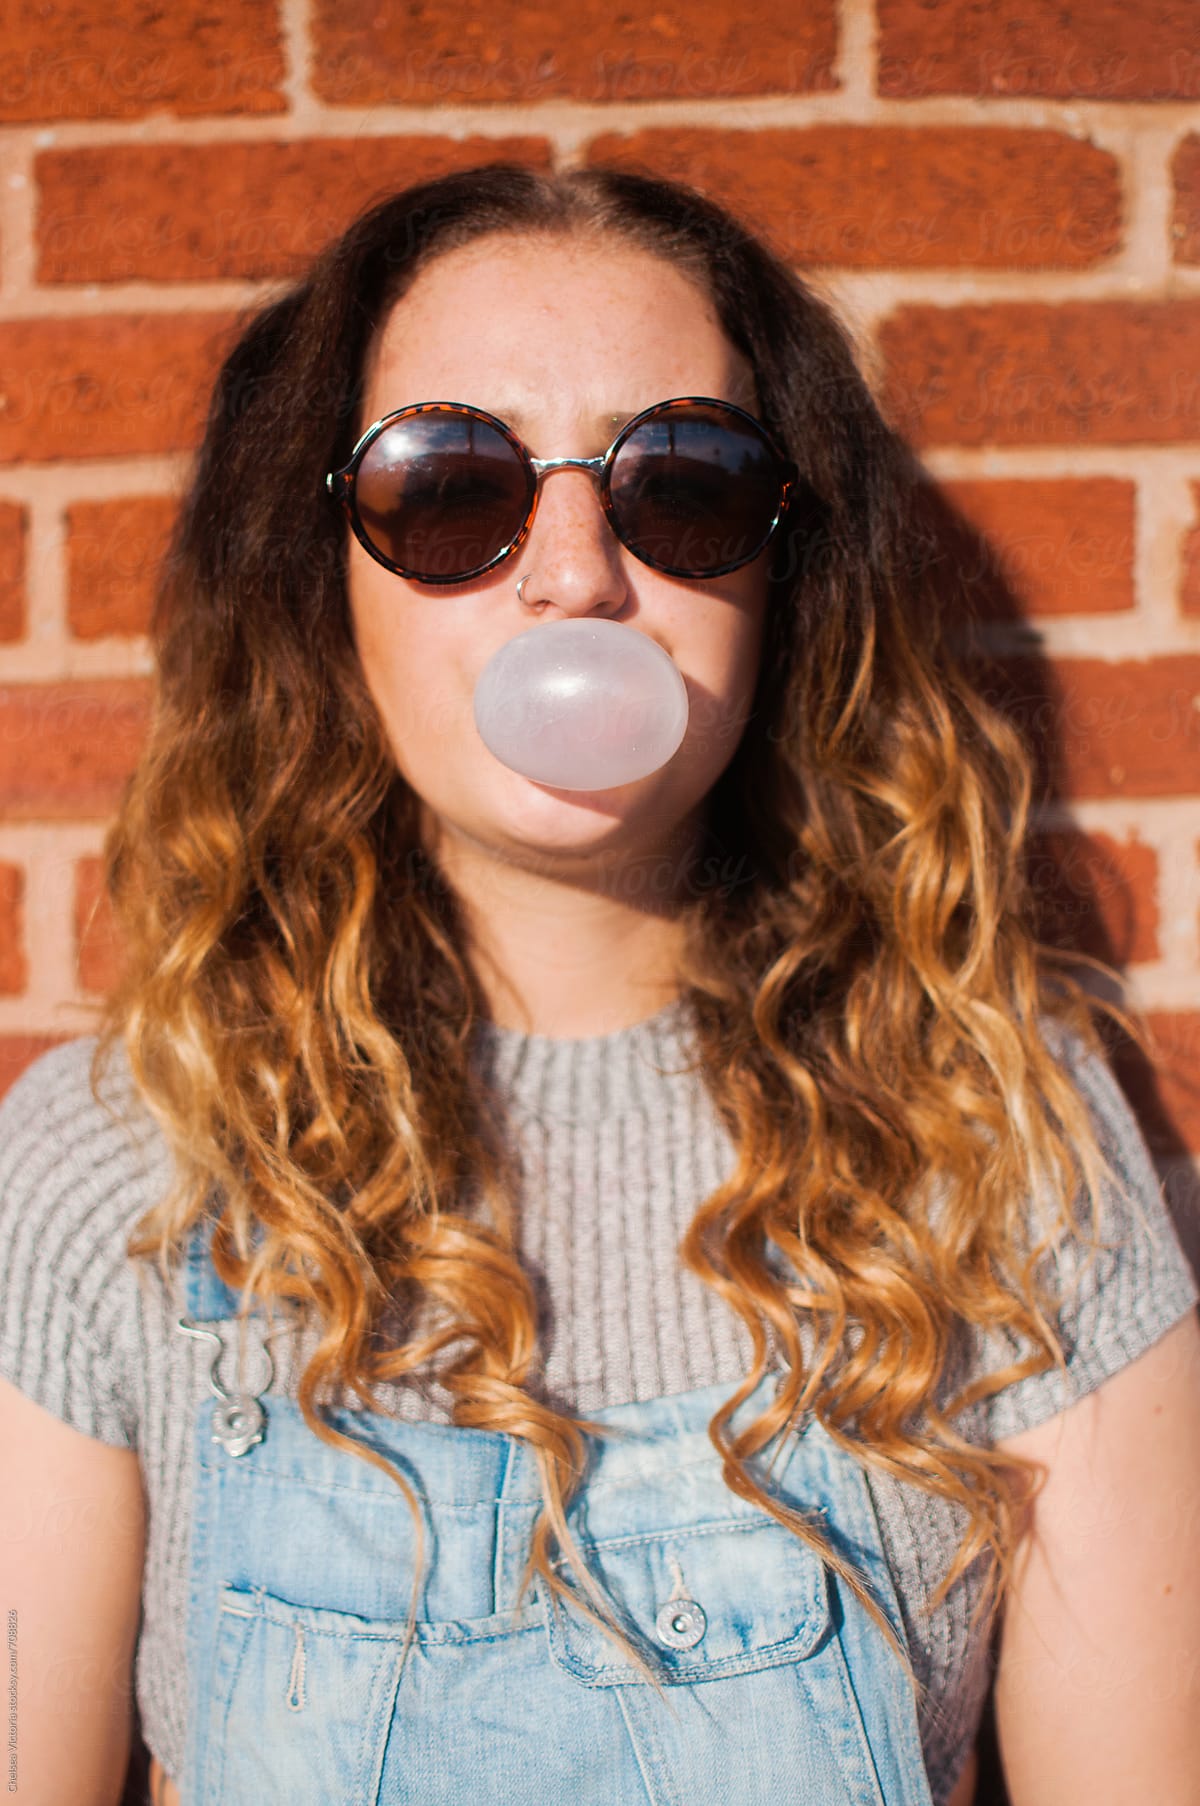 A young woman blowing bubble gum. 